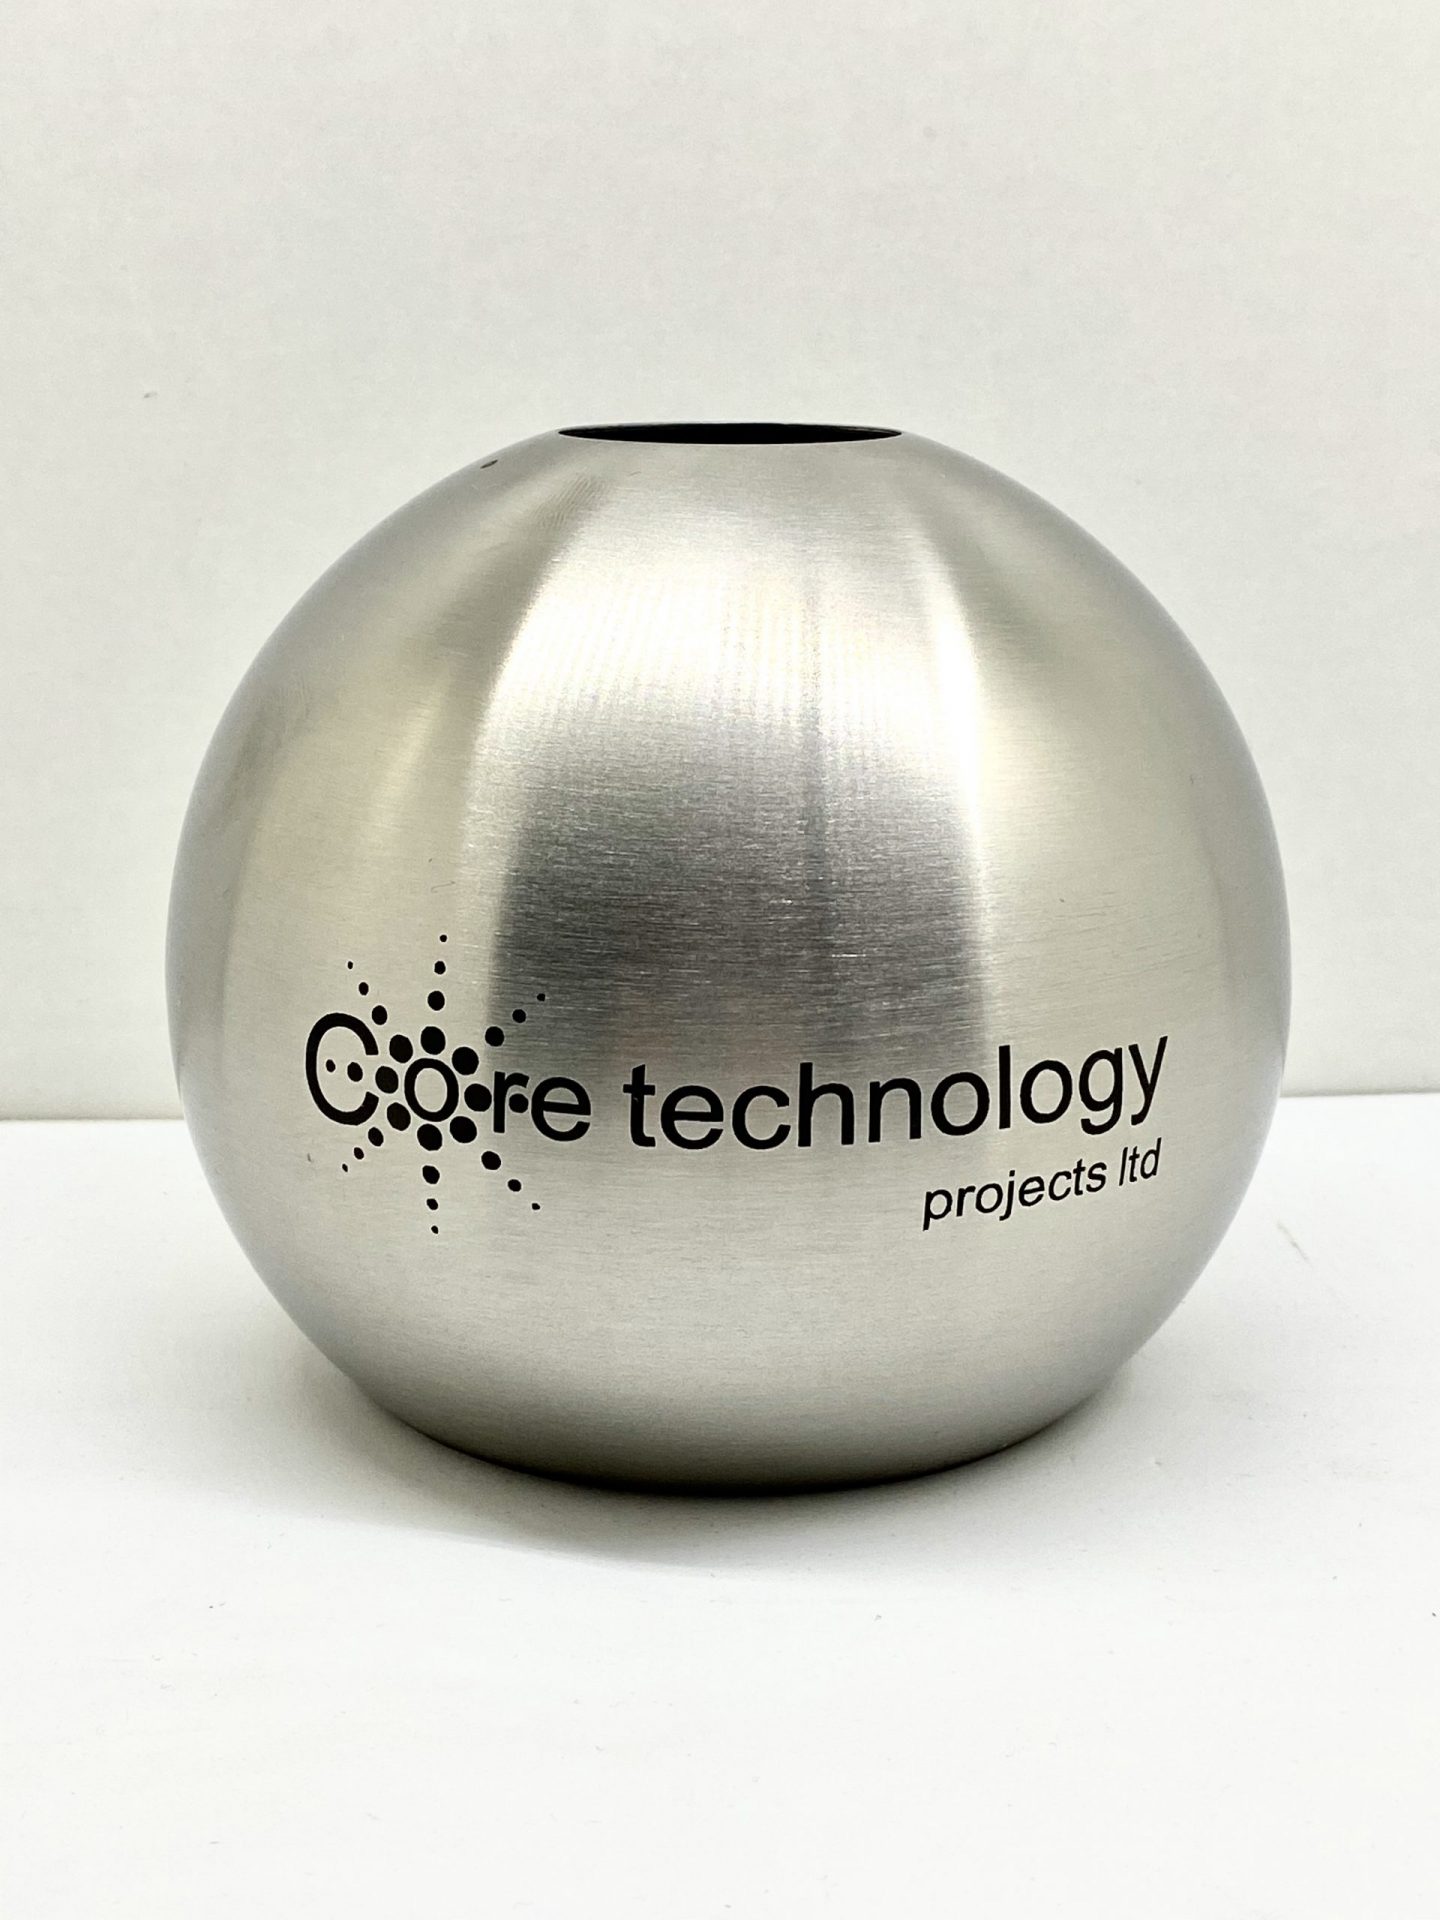 Gallo Acoustic - Stainless Steel Speaker - laser engraved laser etched -Core Technology - Story